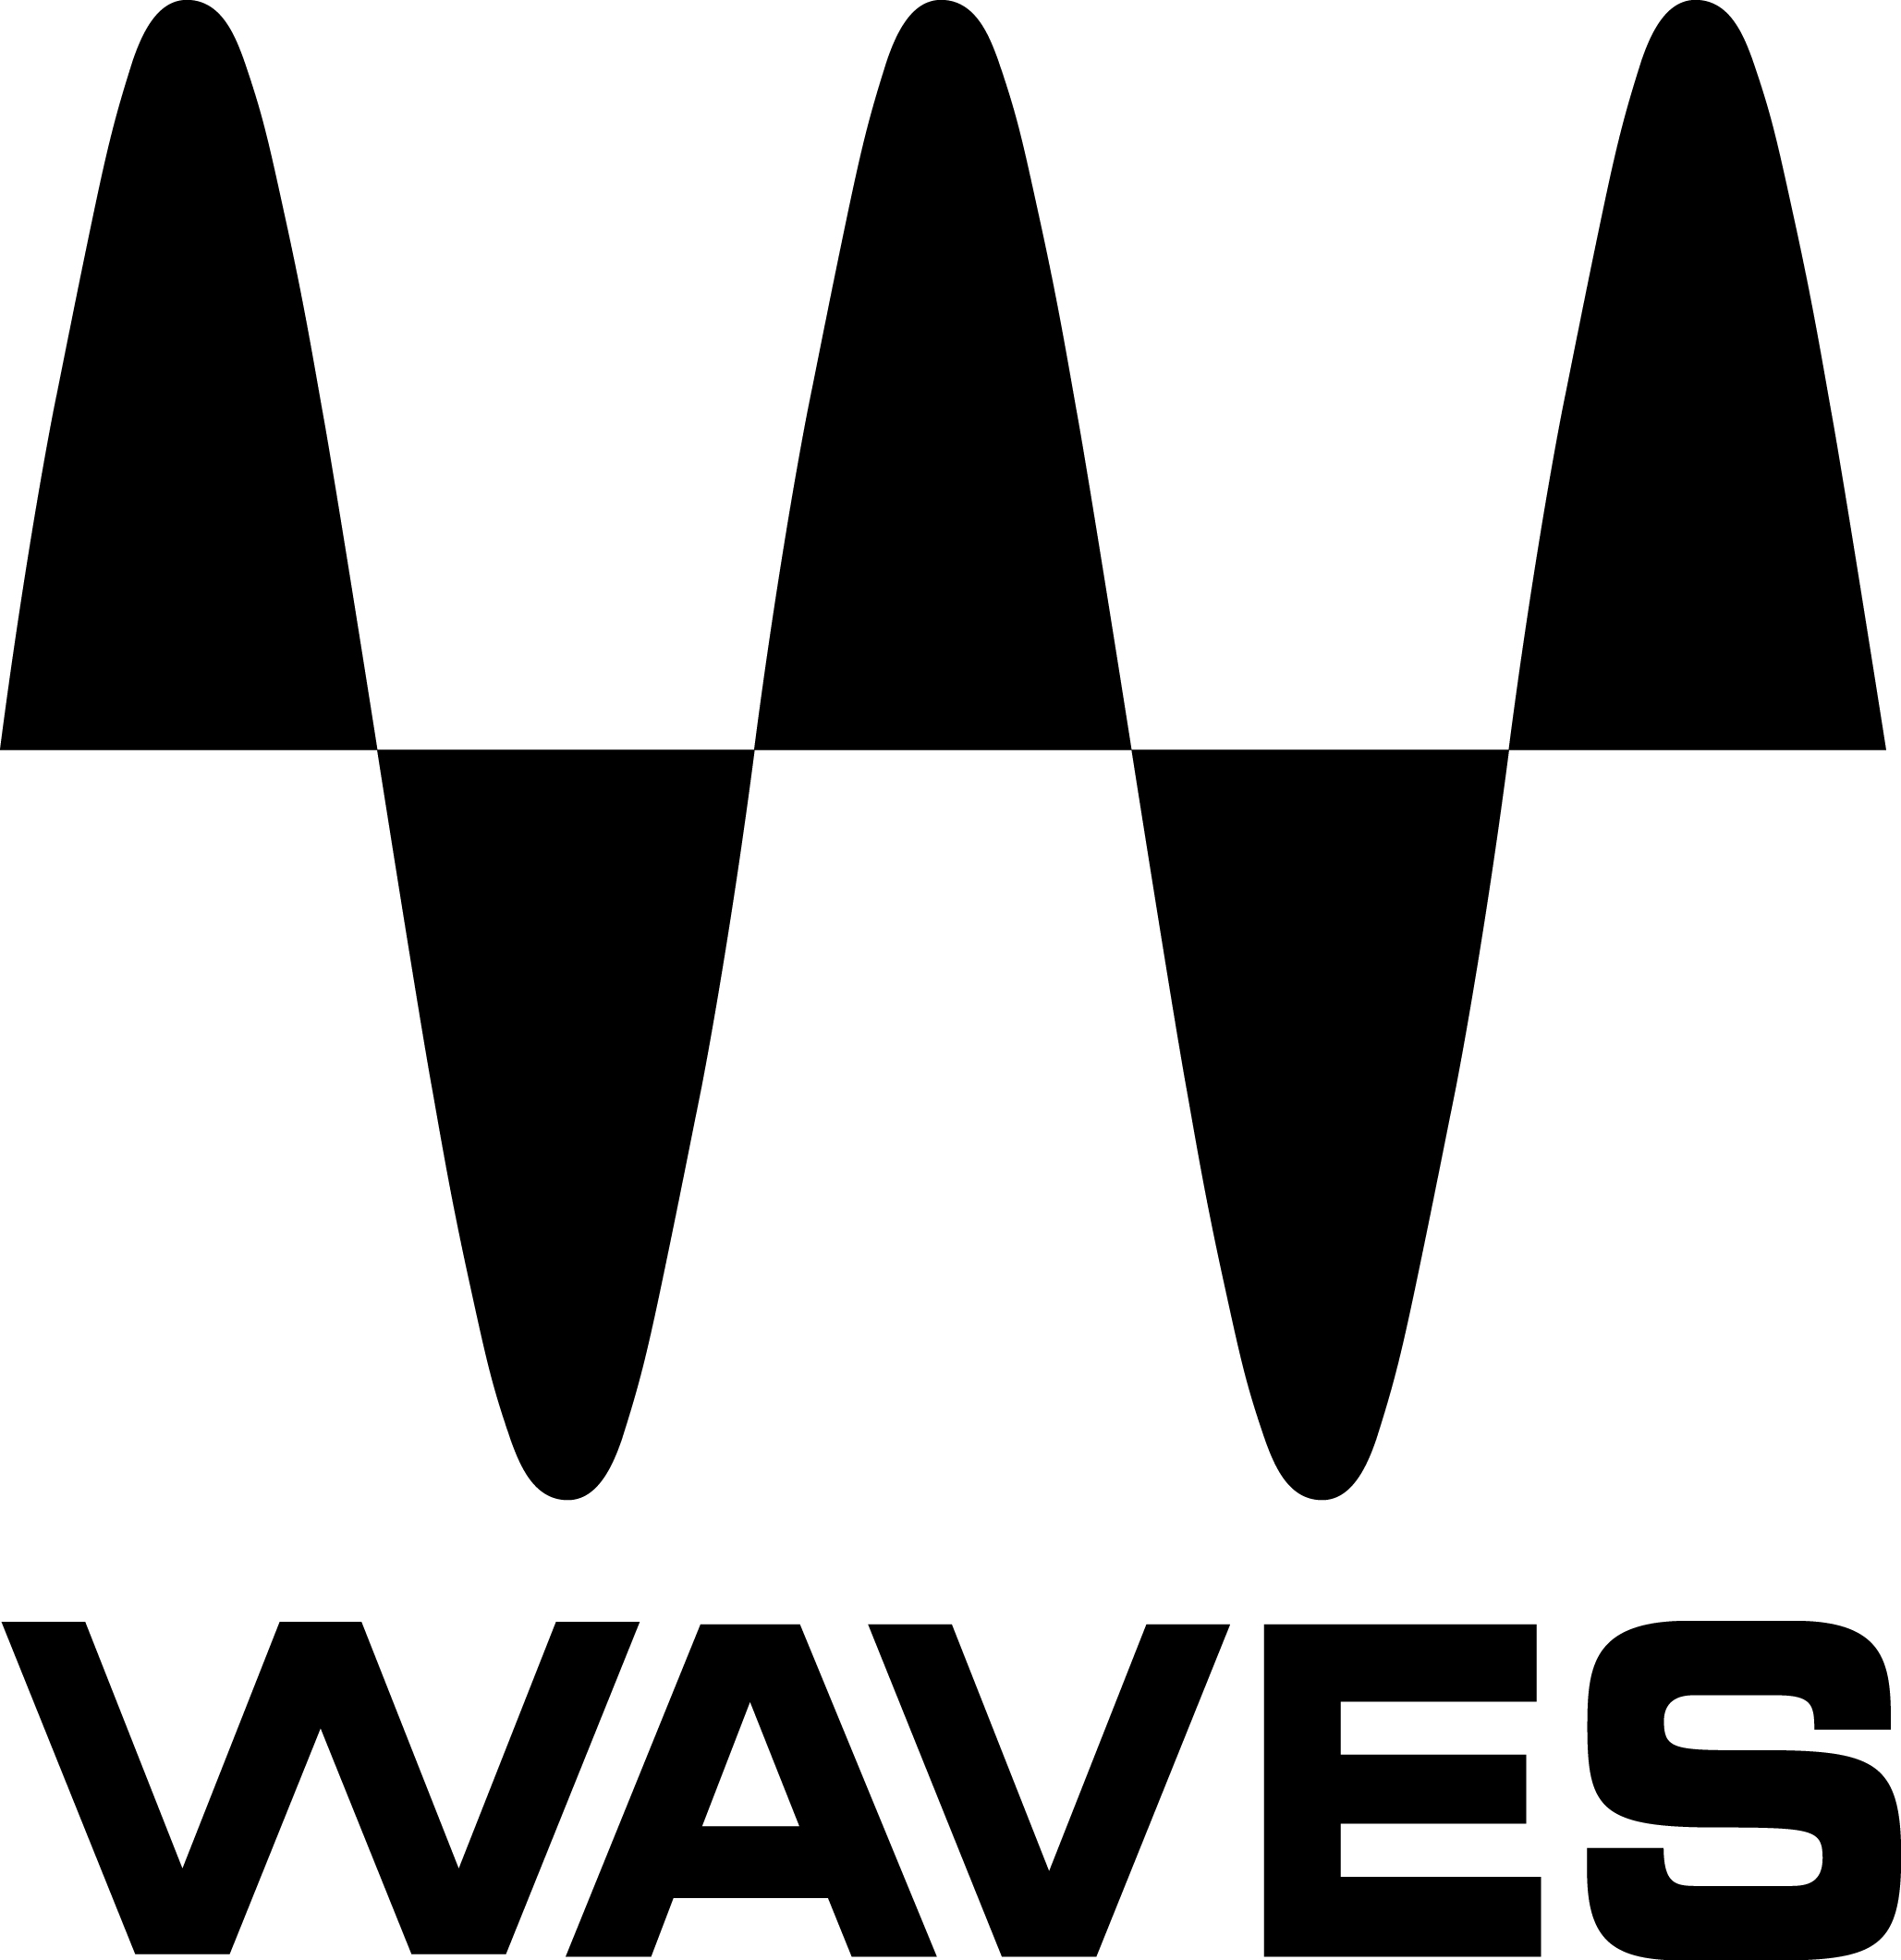 Additional Waves Serves In Stock